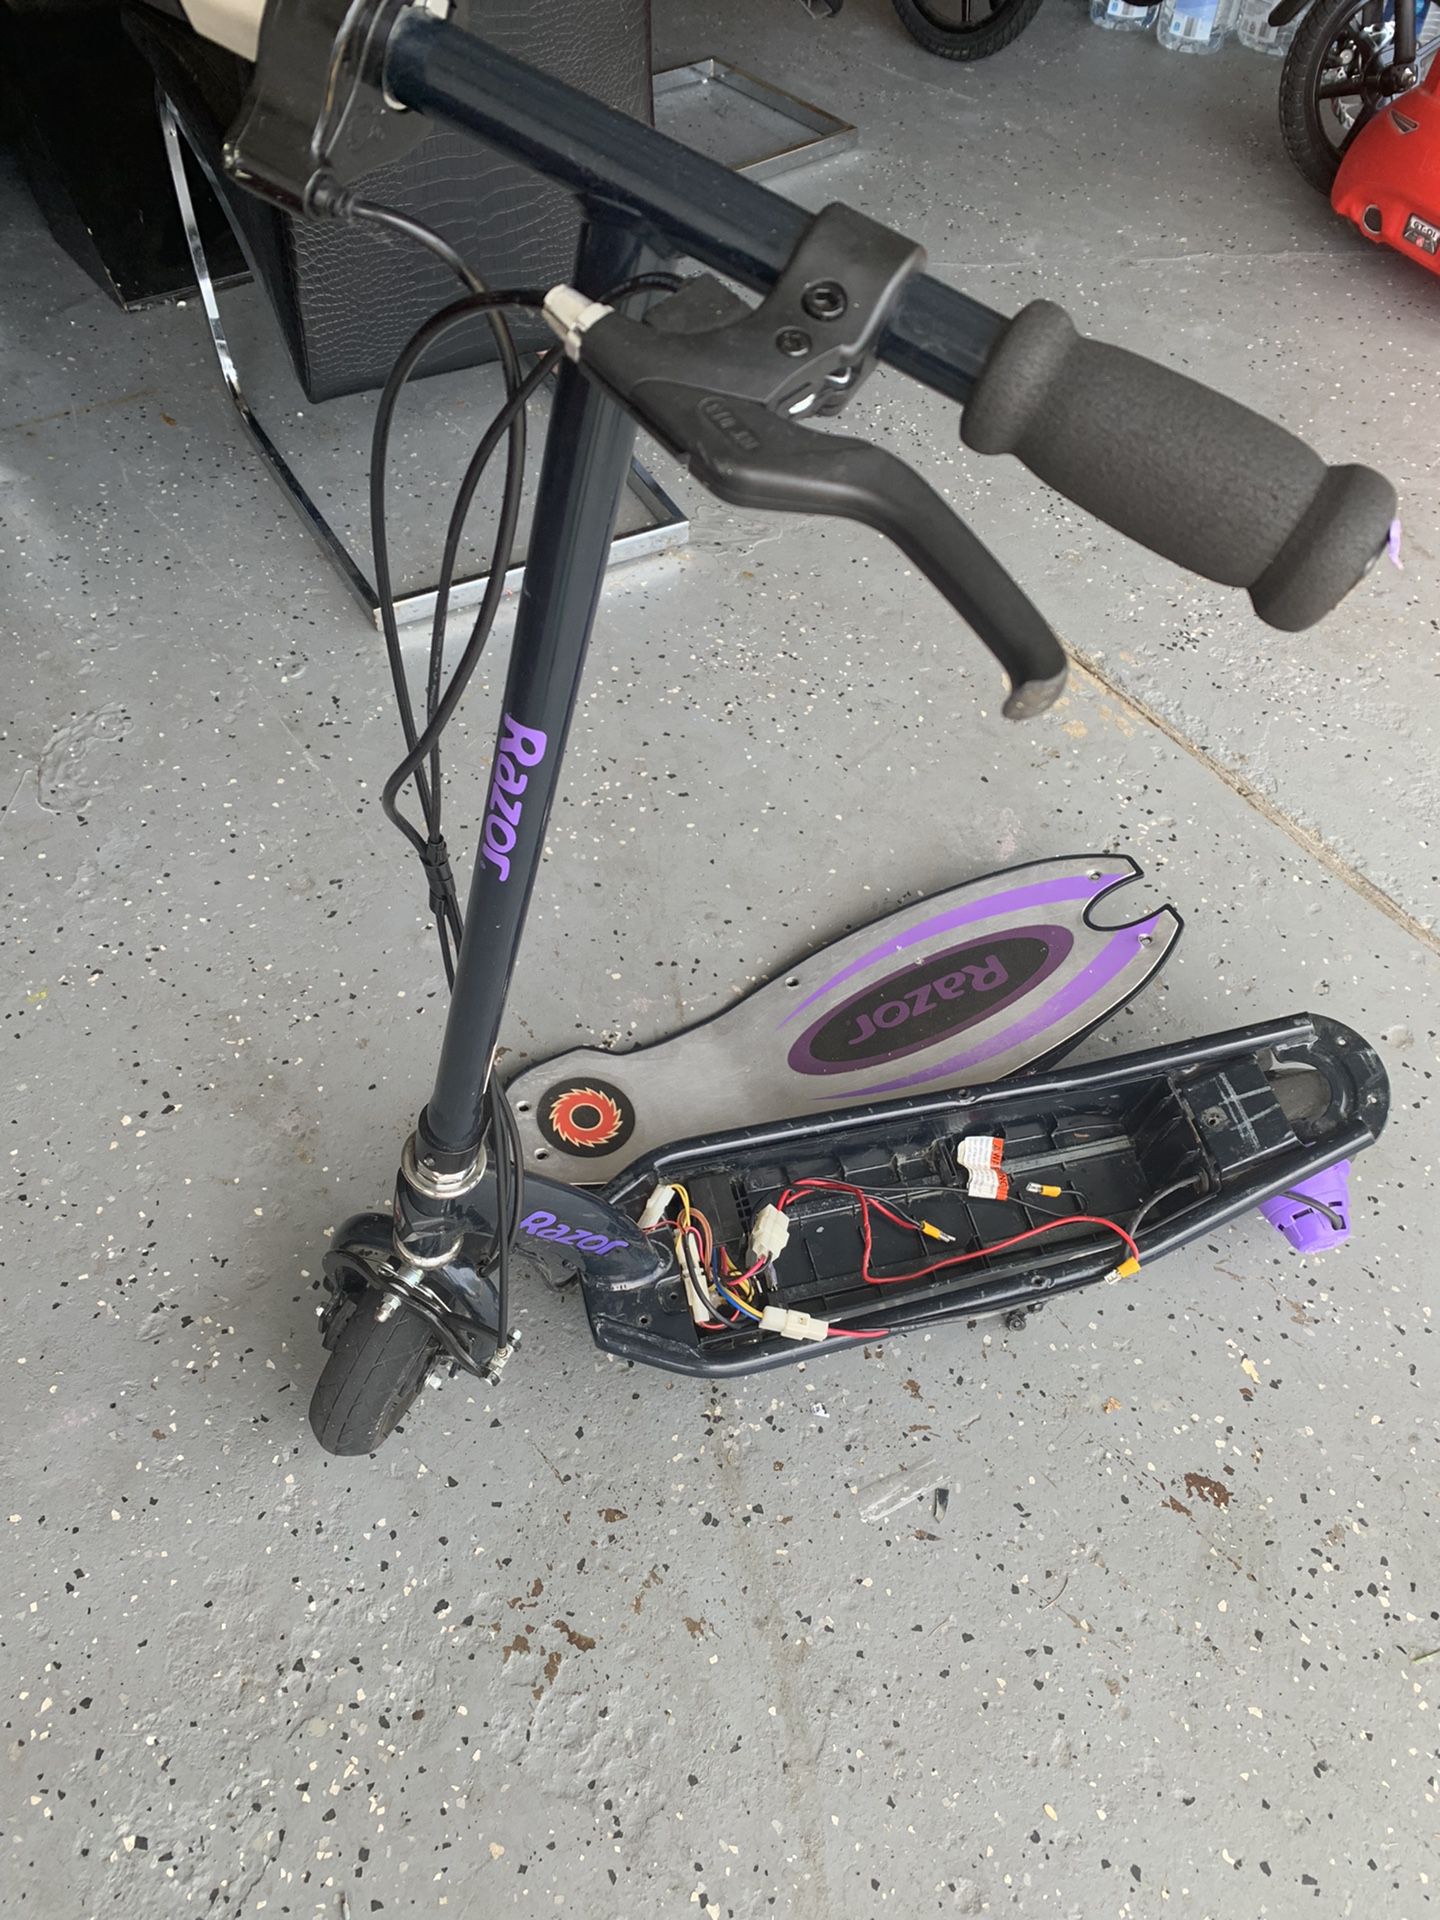 Electric Scooter No Battery, Doesn’t Work